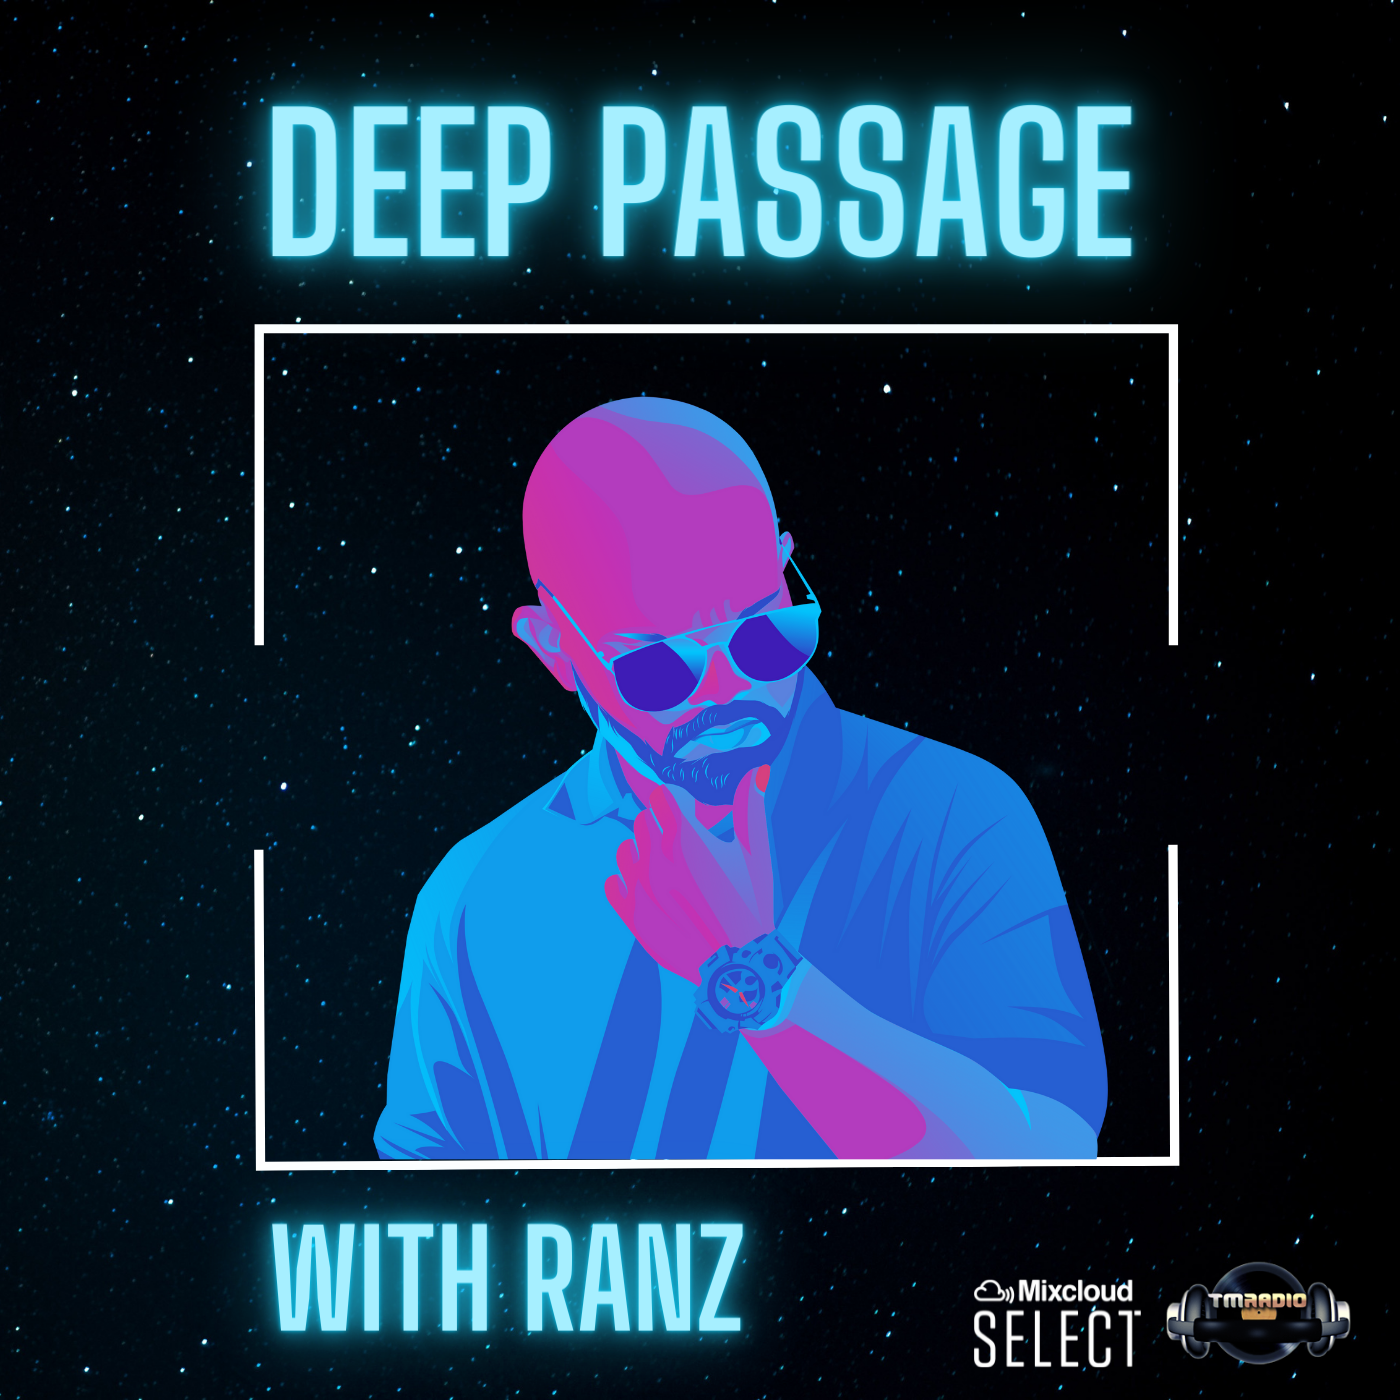 DEEP PASSAGE :: Episode aired on January 17, 4pm banner logo